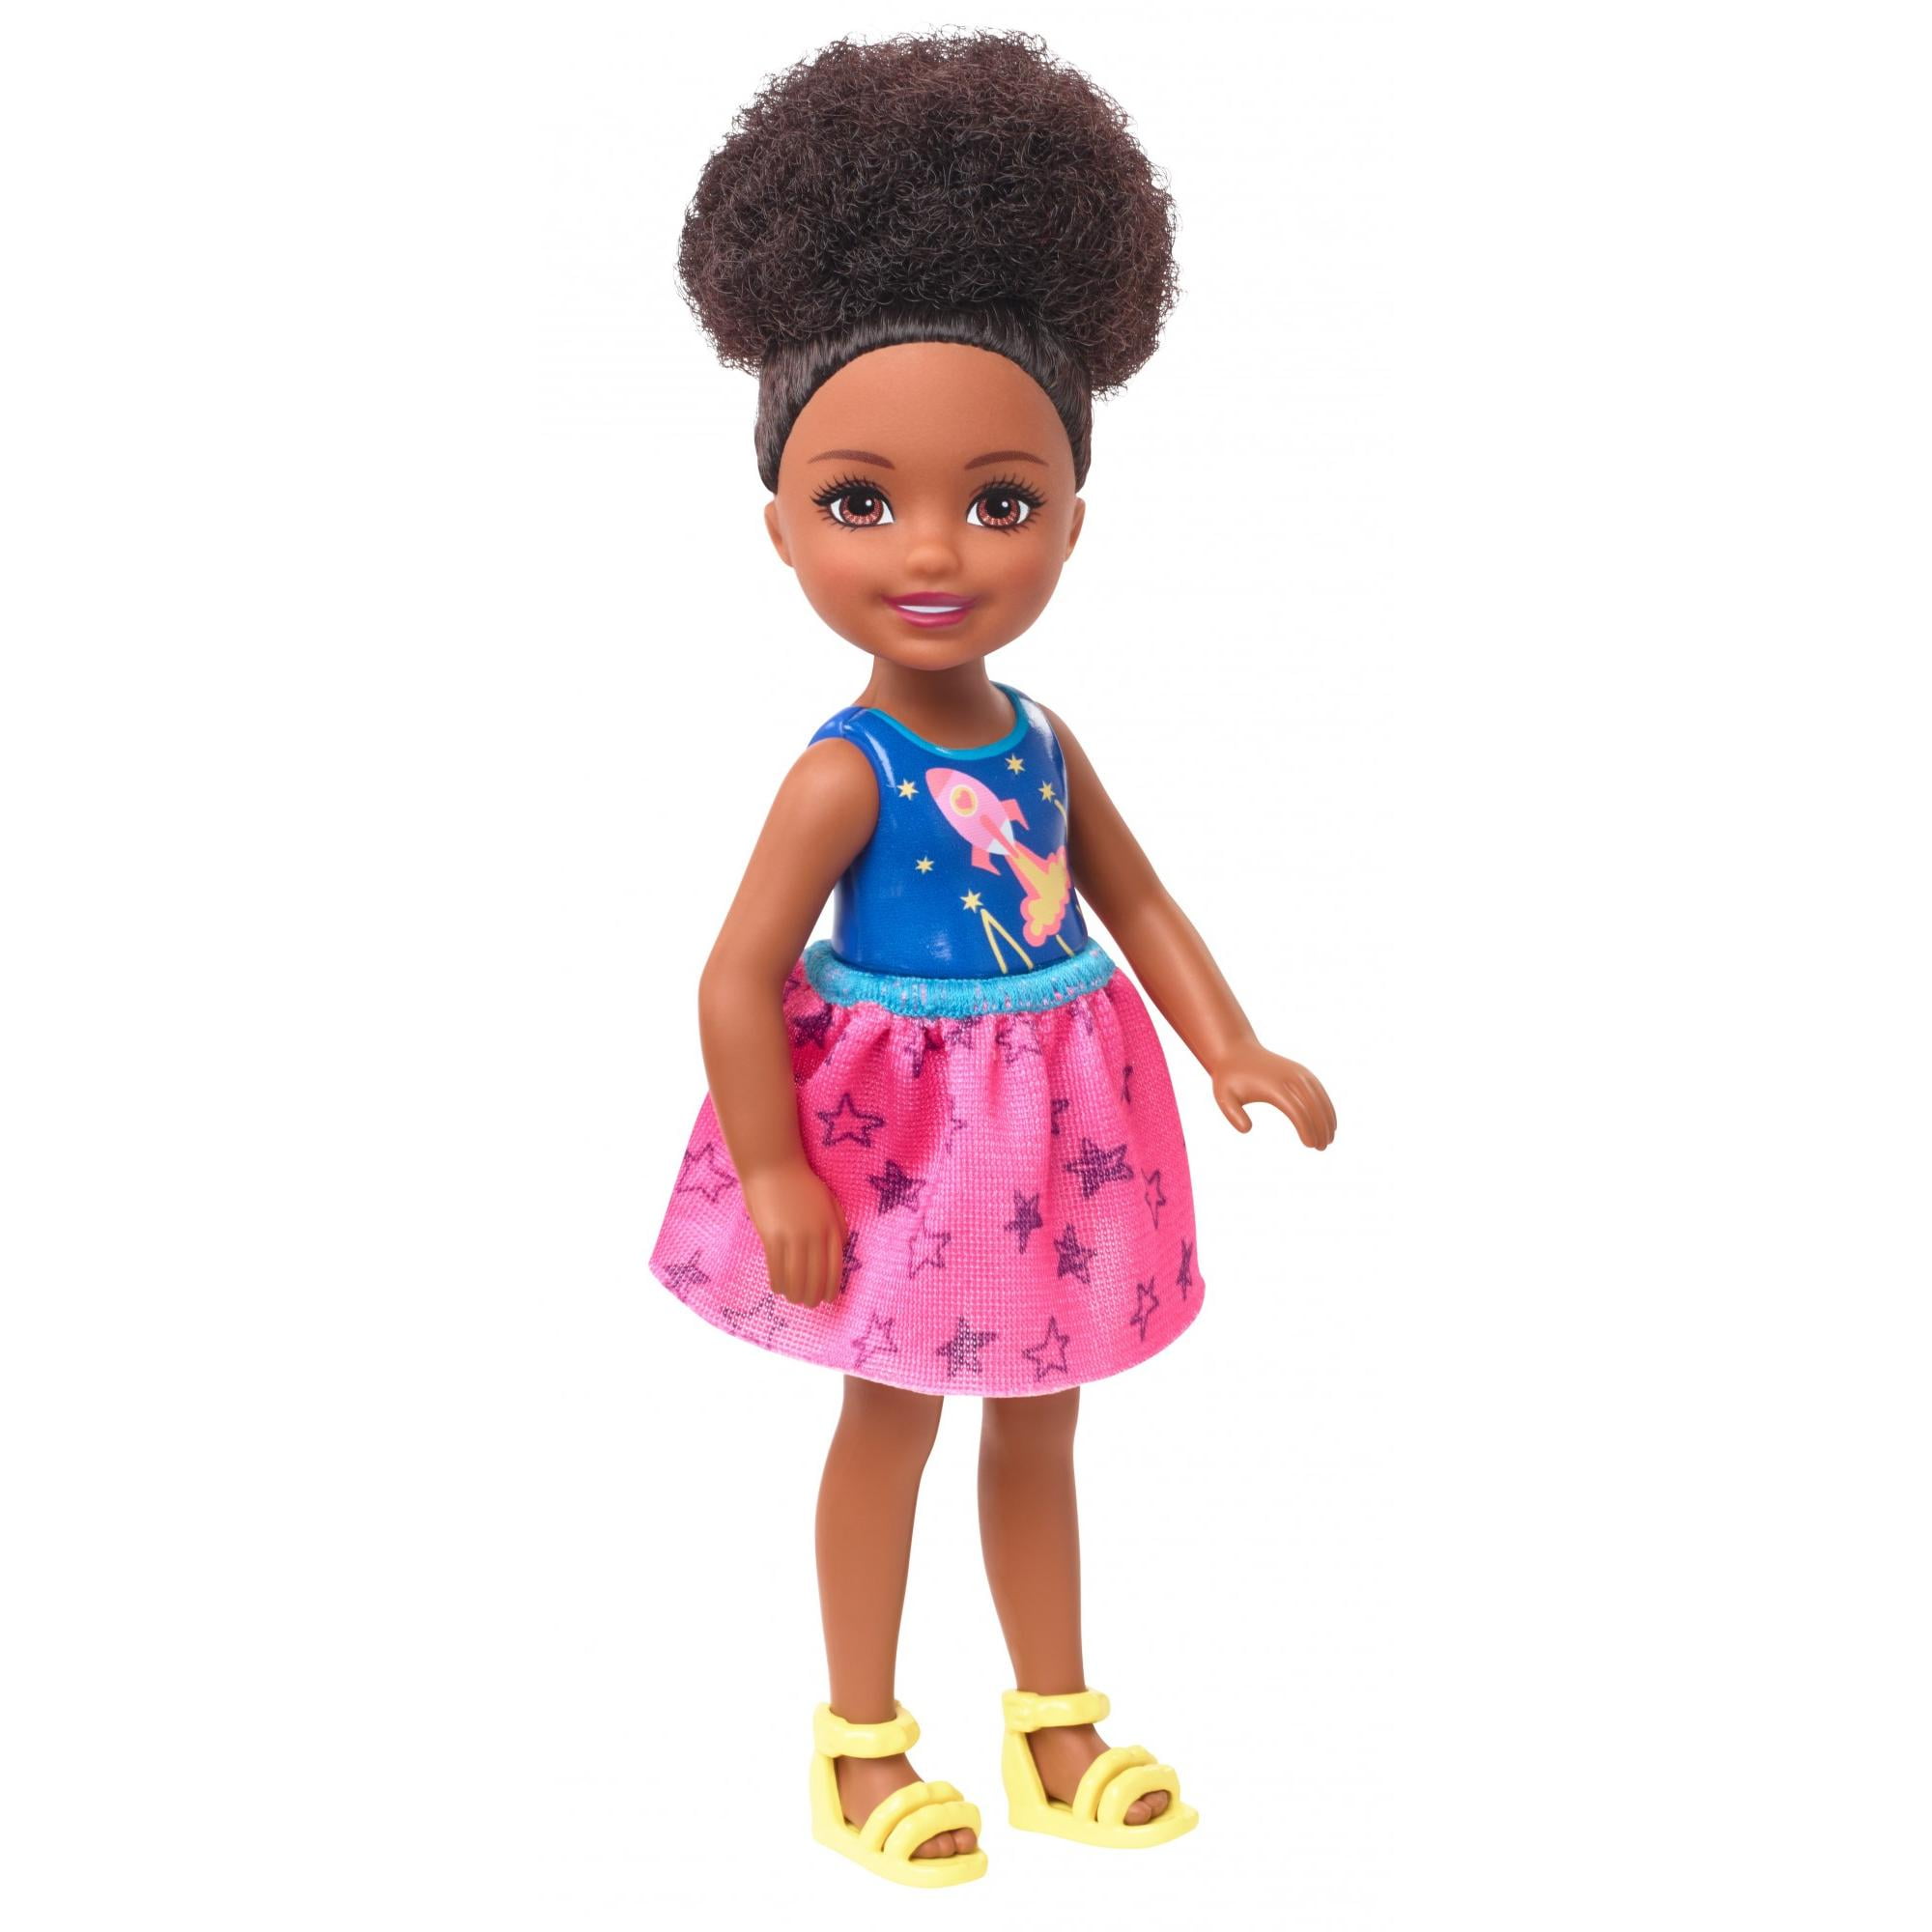 Barbie Club Chelsea Doll, 6-Inch Brunette Doll With Space-Themed Graphic